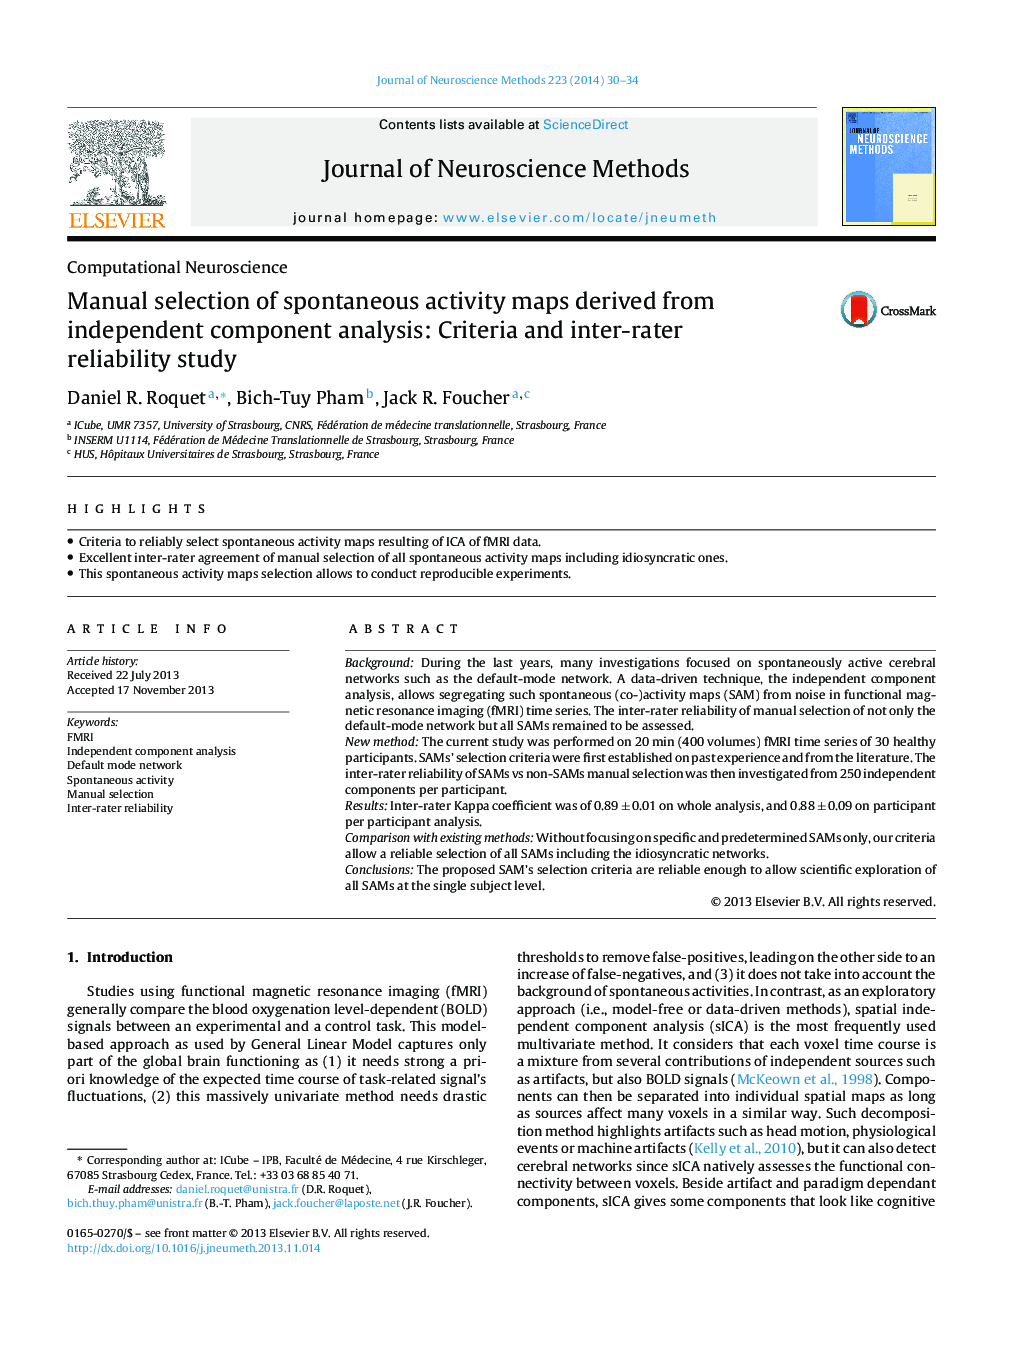 Manual selection of spontaneous activity maps derived from independent component analysis: Criteria and inter-rater reliability study